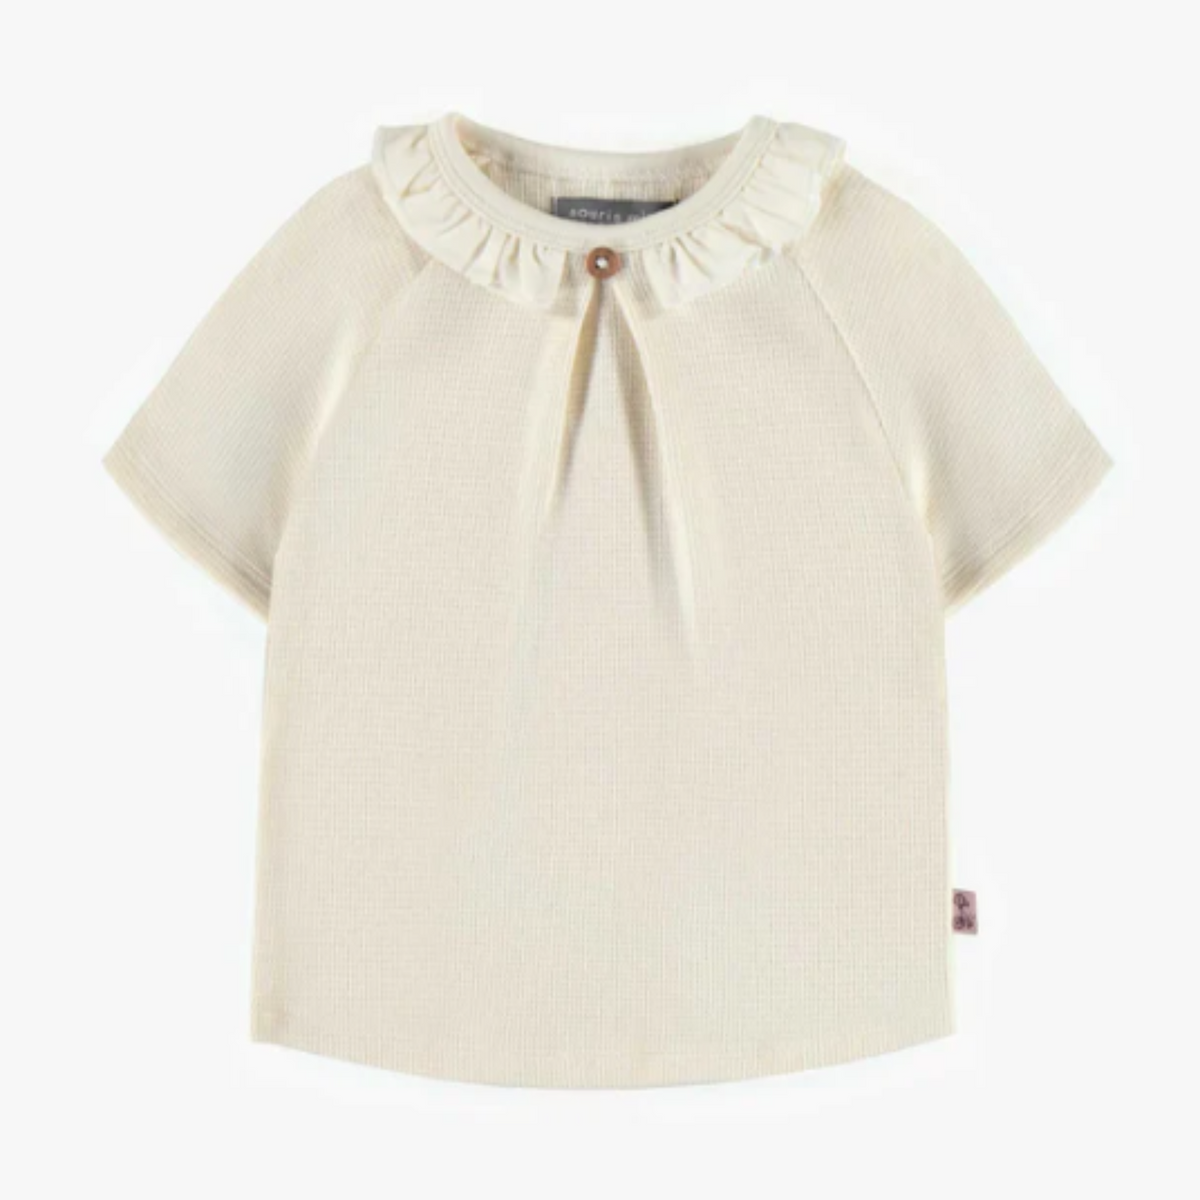 Cream short-sleeved t-shirt in waffle jersey, baby